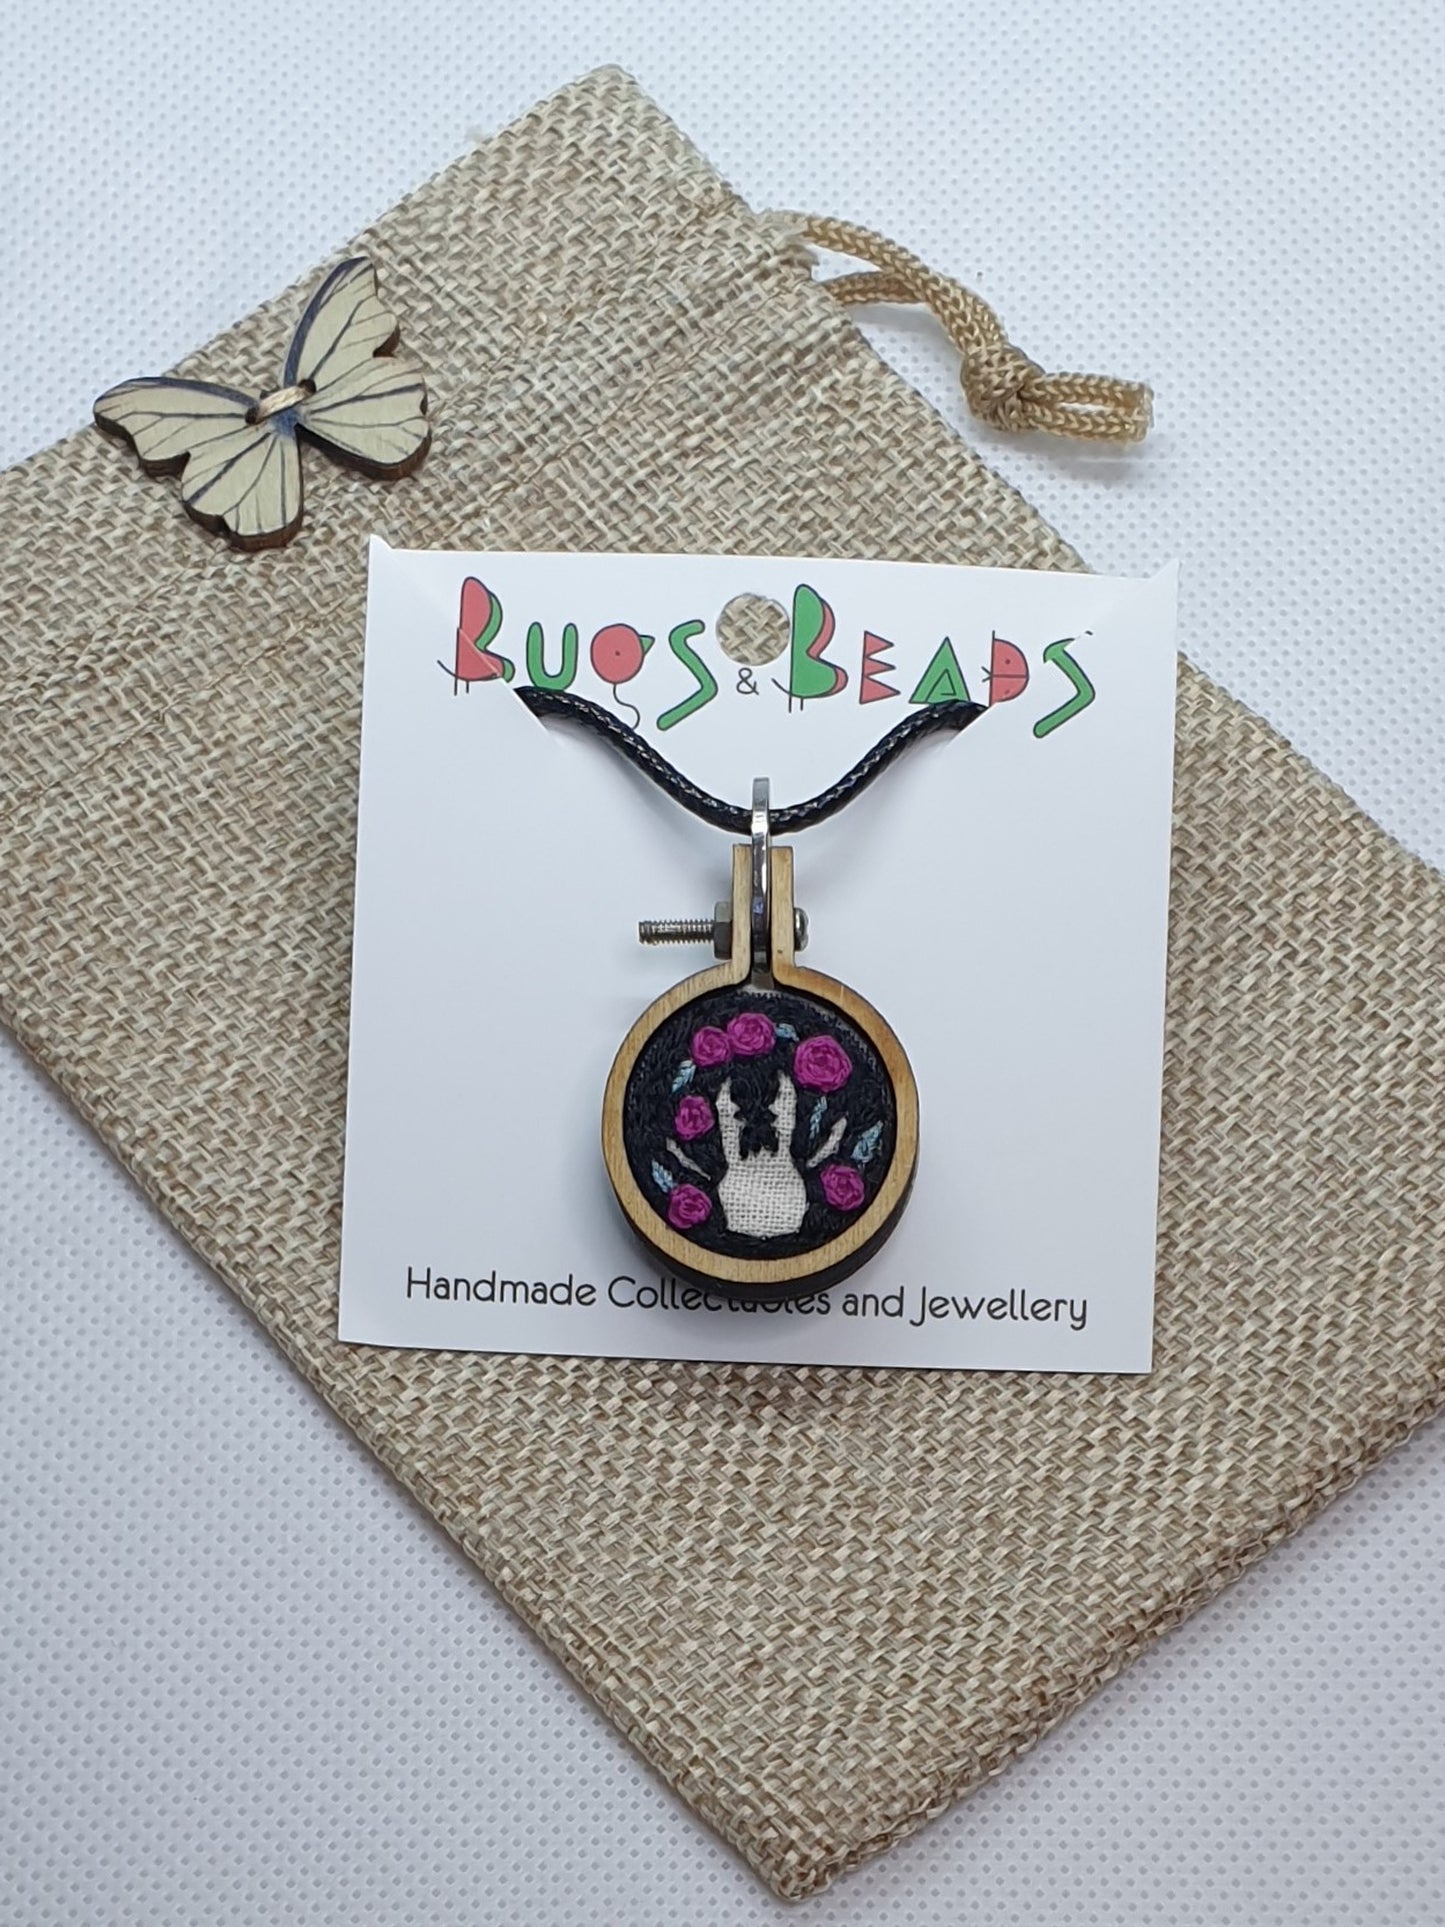 Stag Beetle silhouette hand embroidered pendant